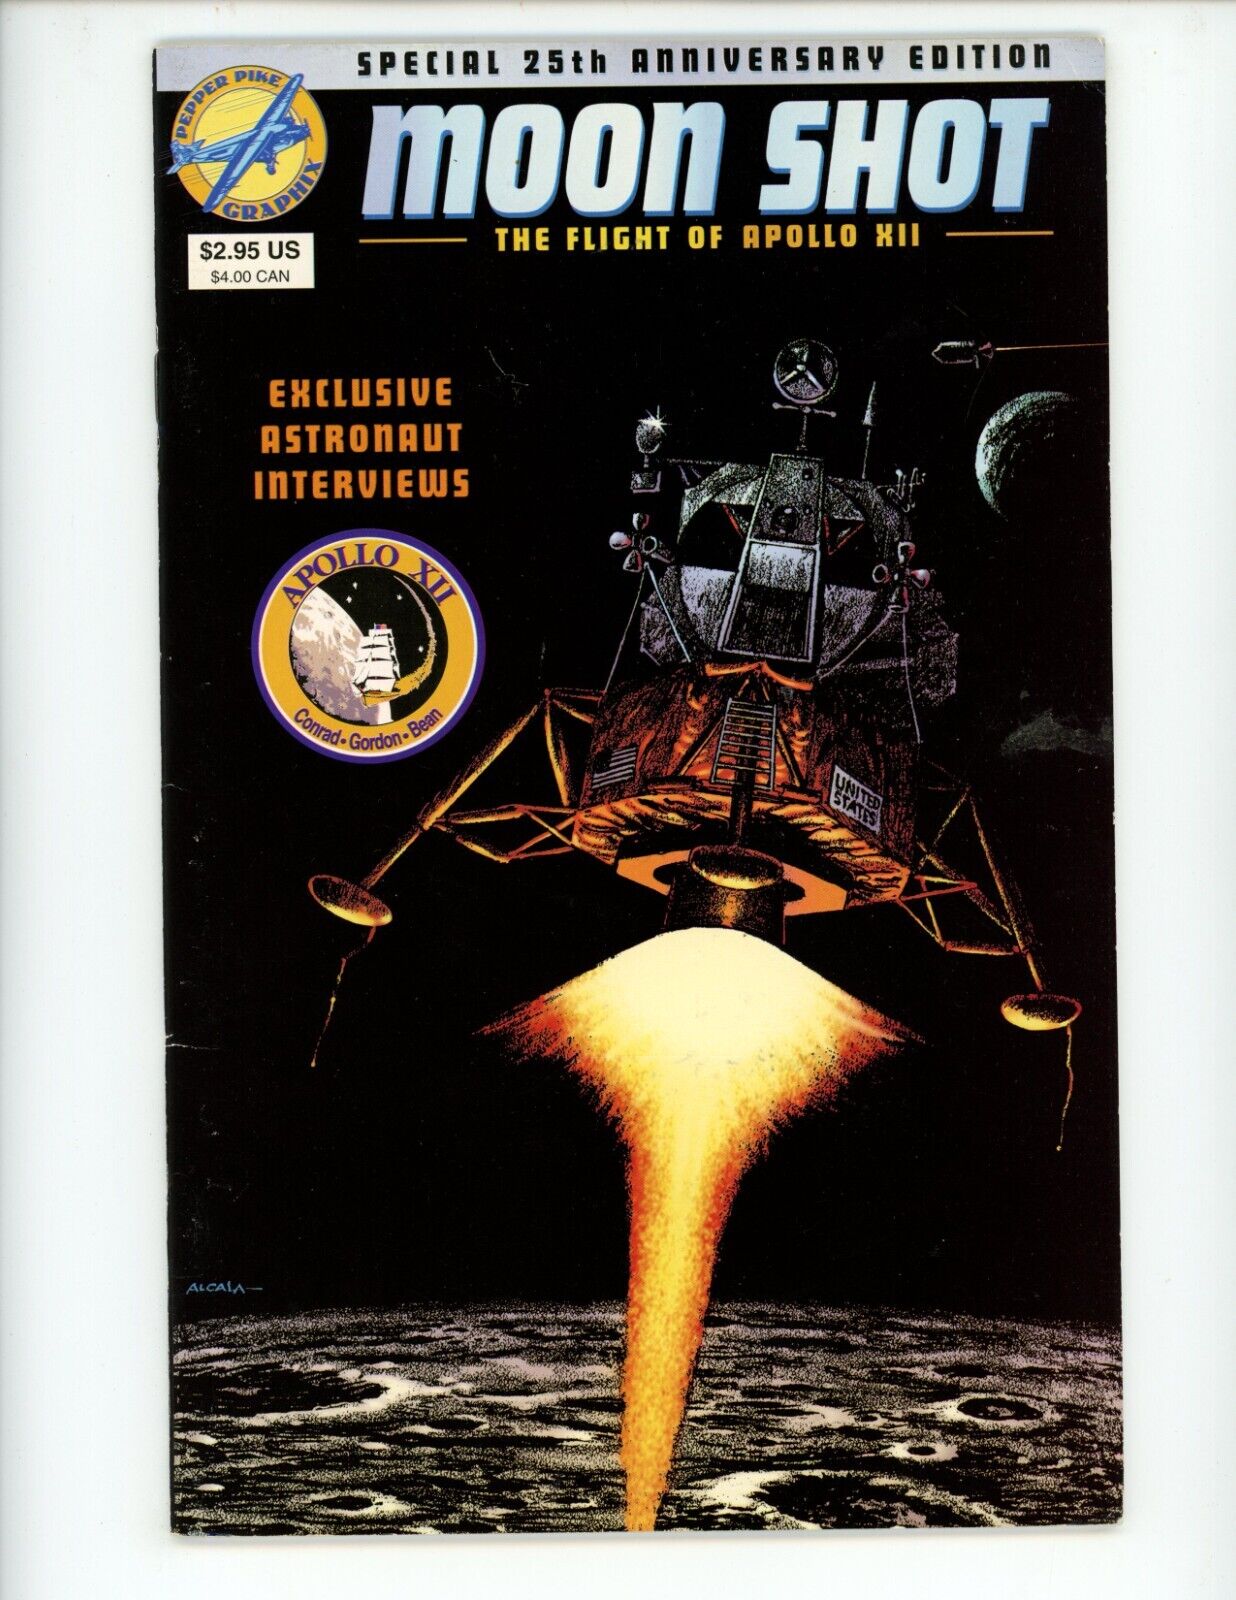 Moon Shot Flight of Apollo 12 #1 Comic 1994 FN- Space Story Pepper Pike